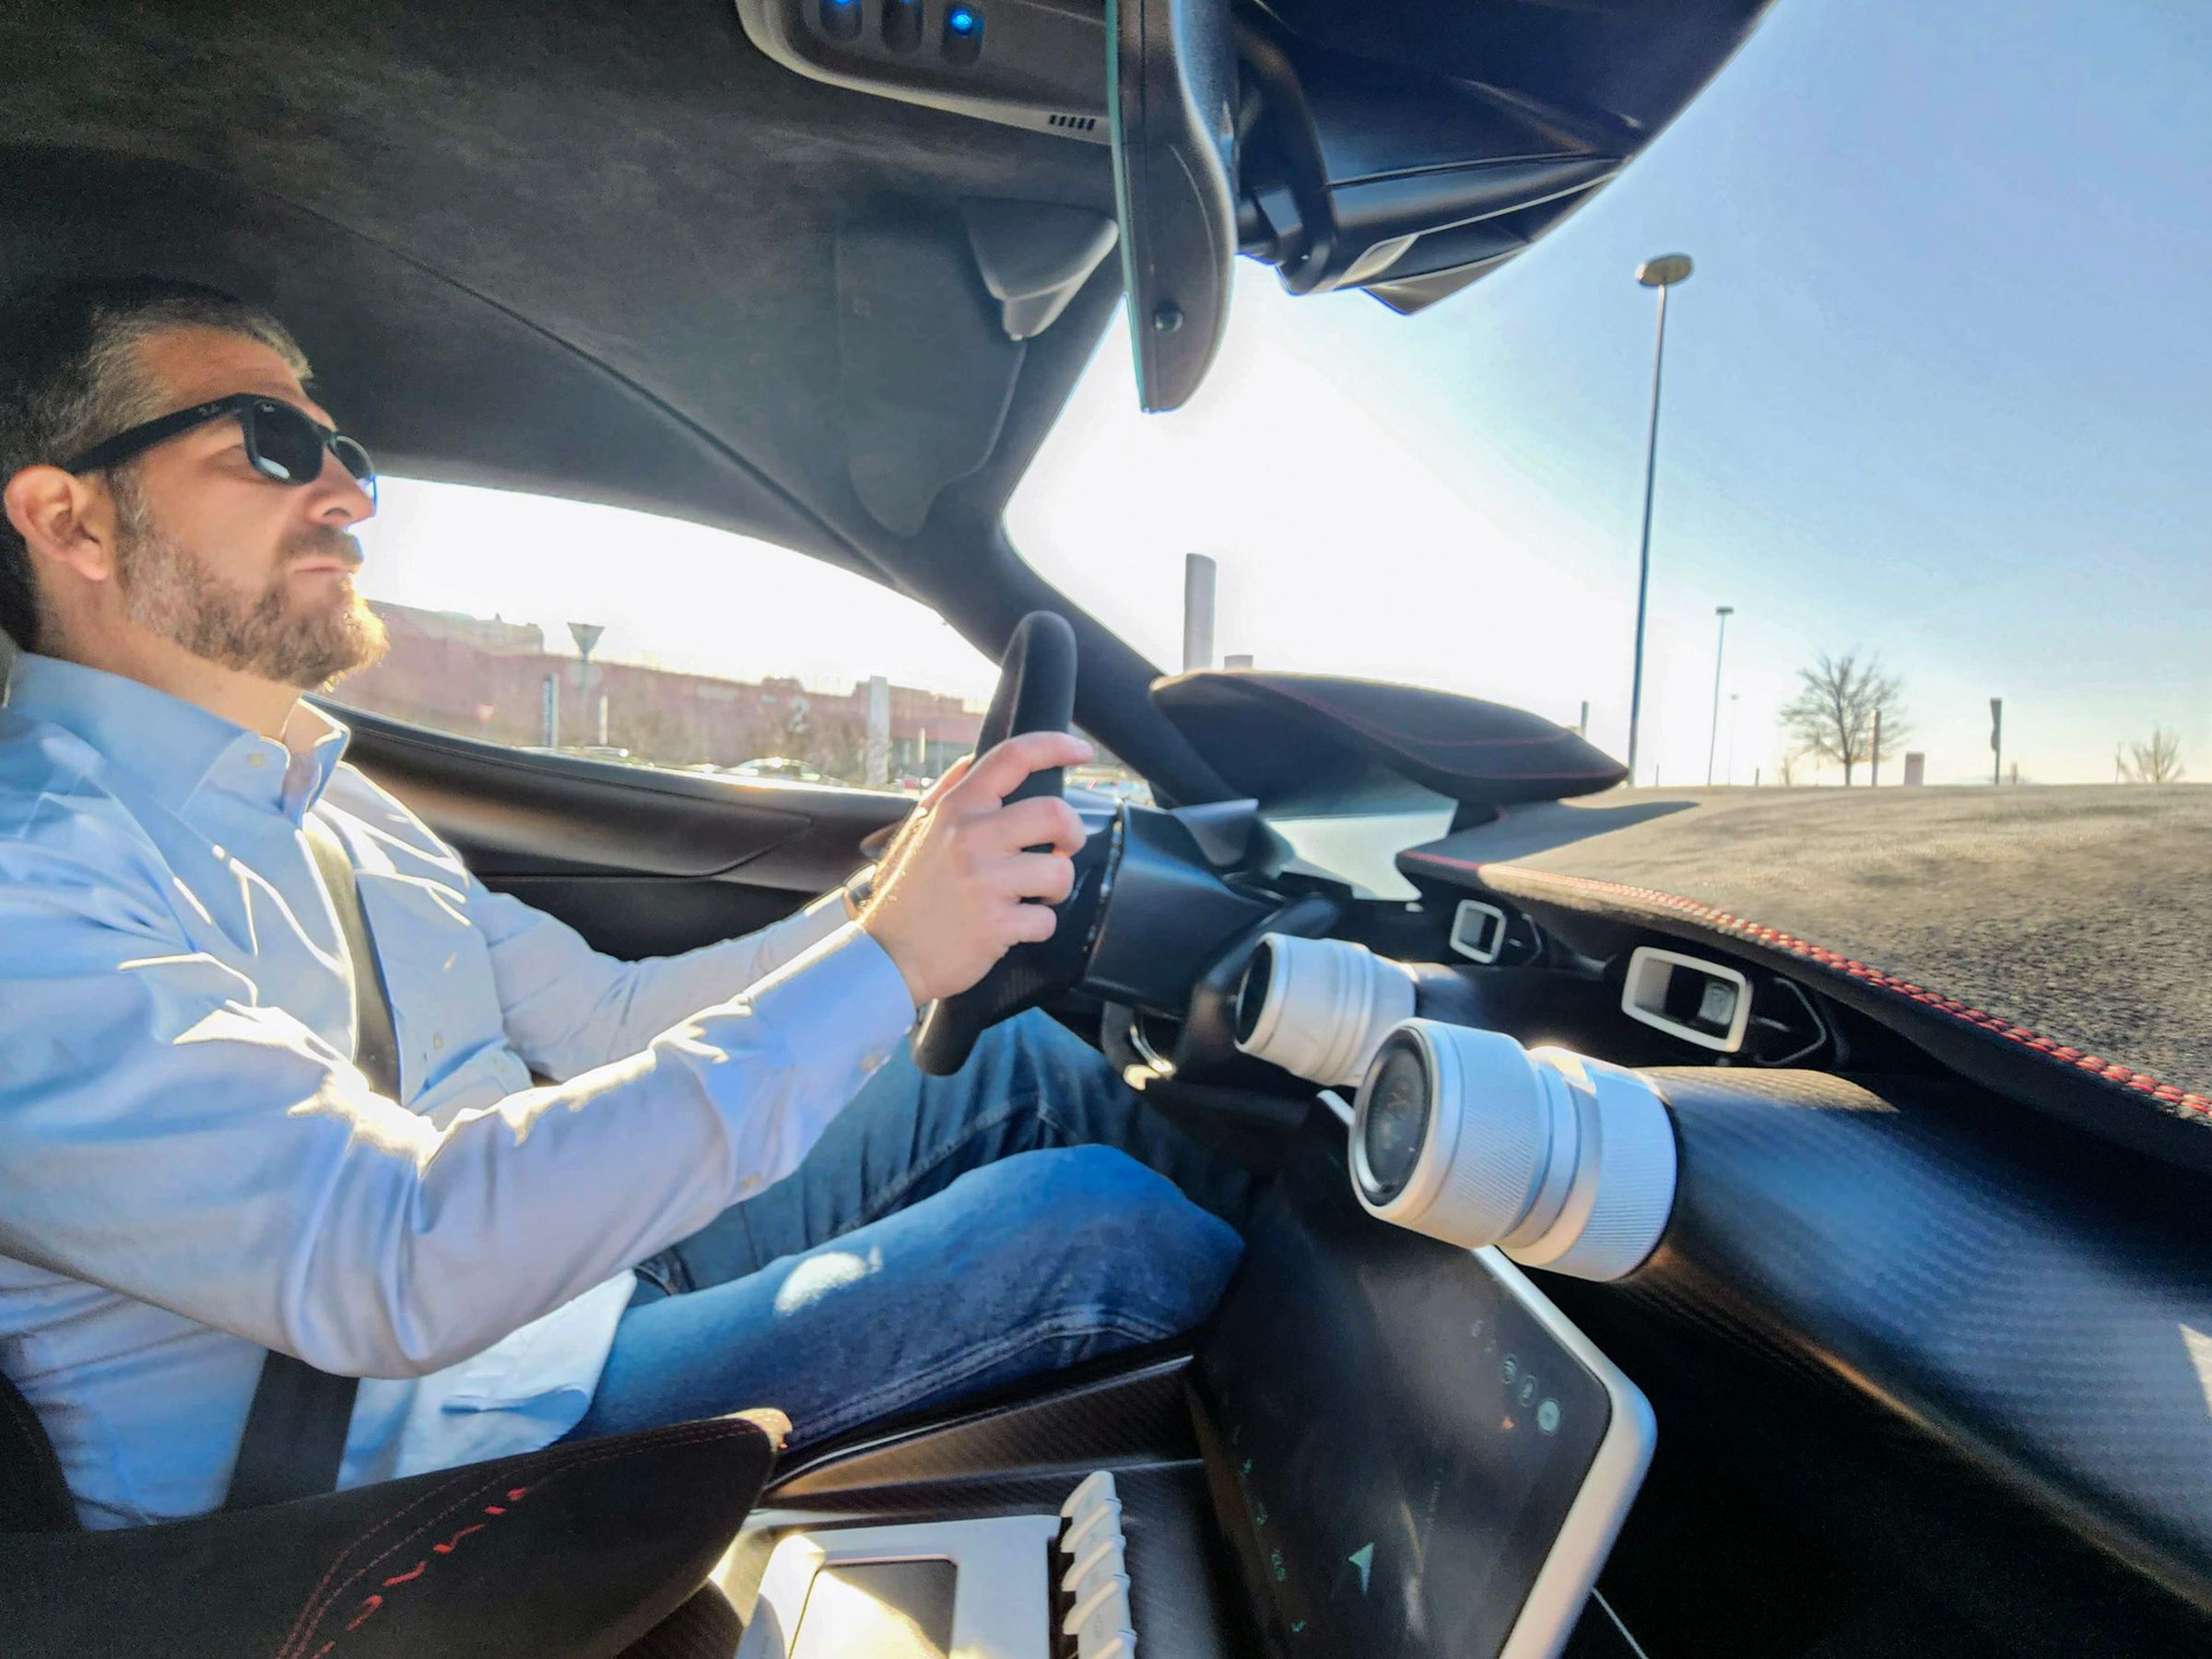 Rimac’s chief test and development driver, Miro Zrncevic, behind the wheel of the company’s $2 million hypercar.